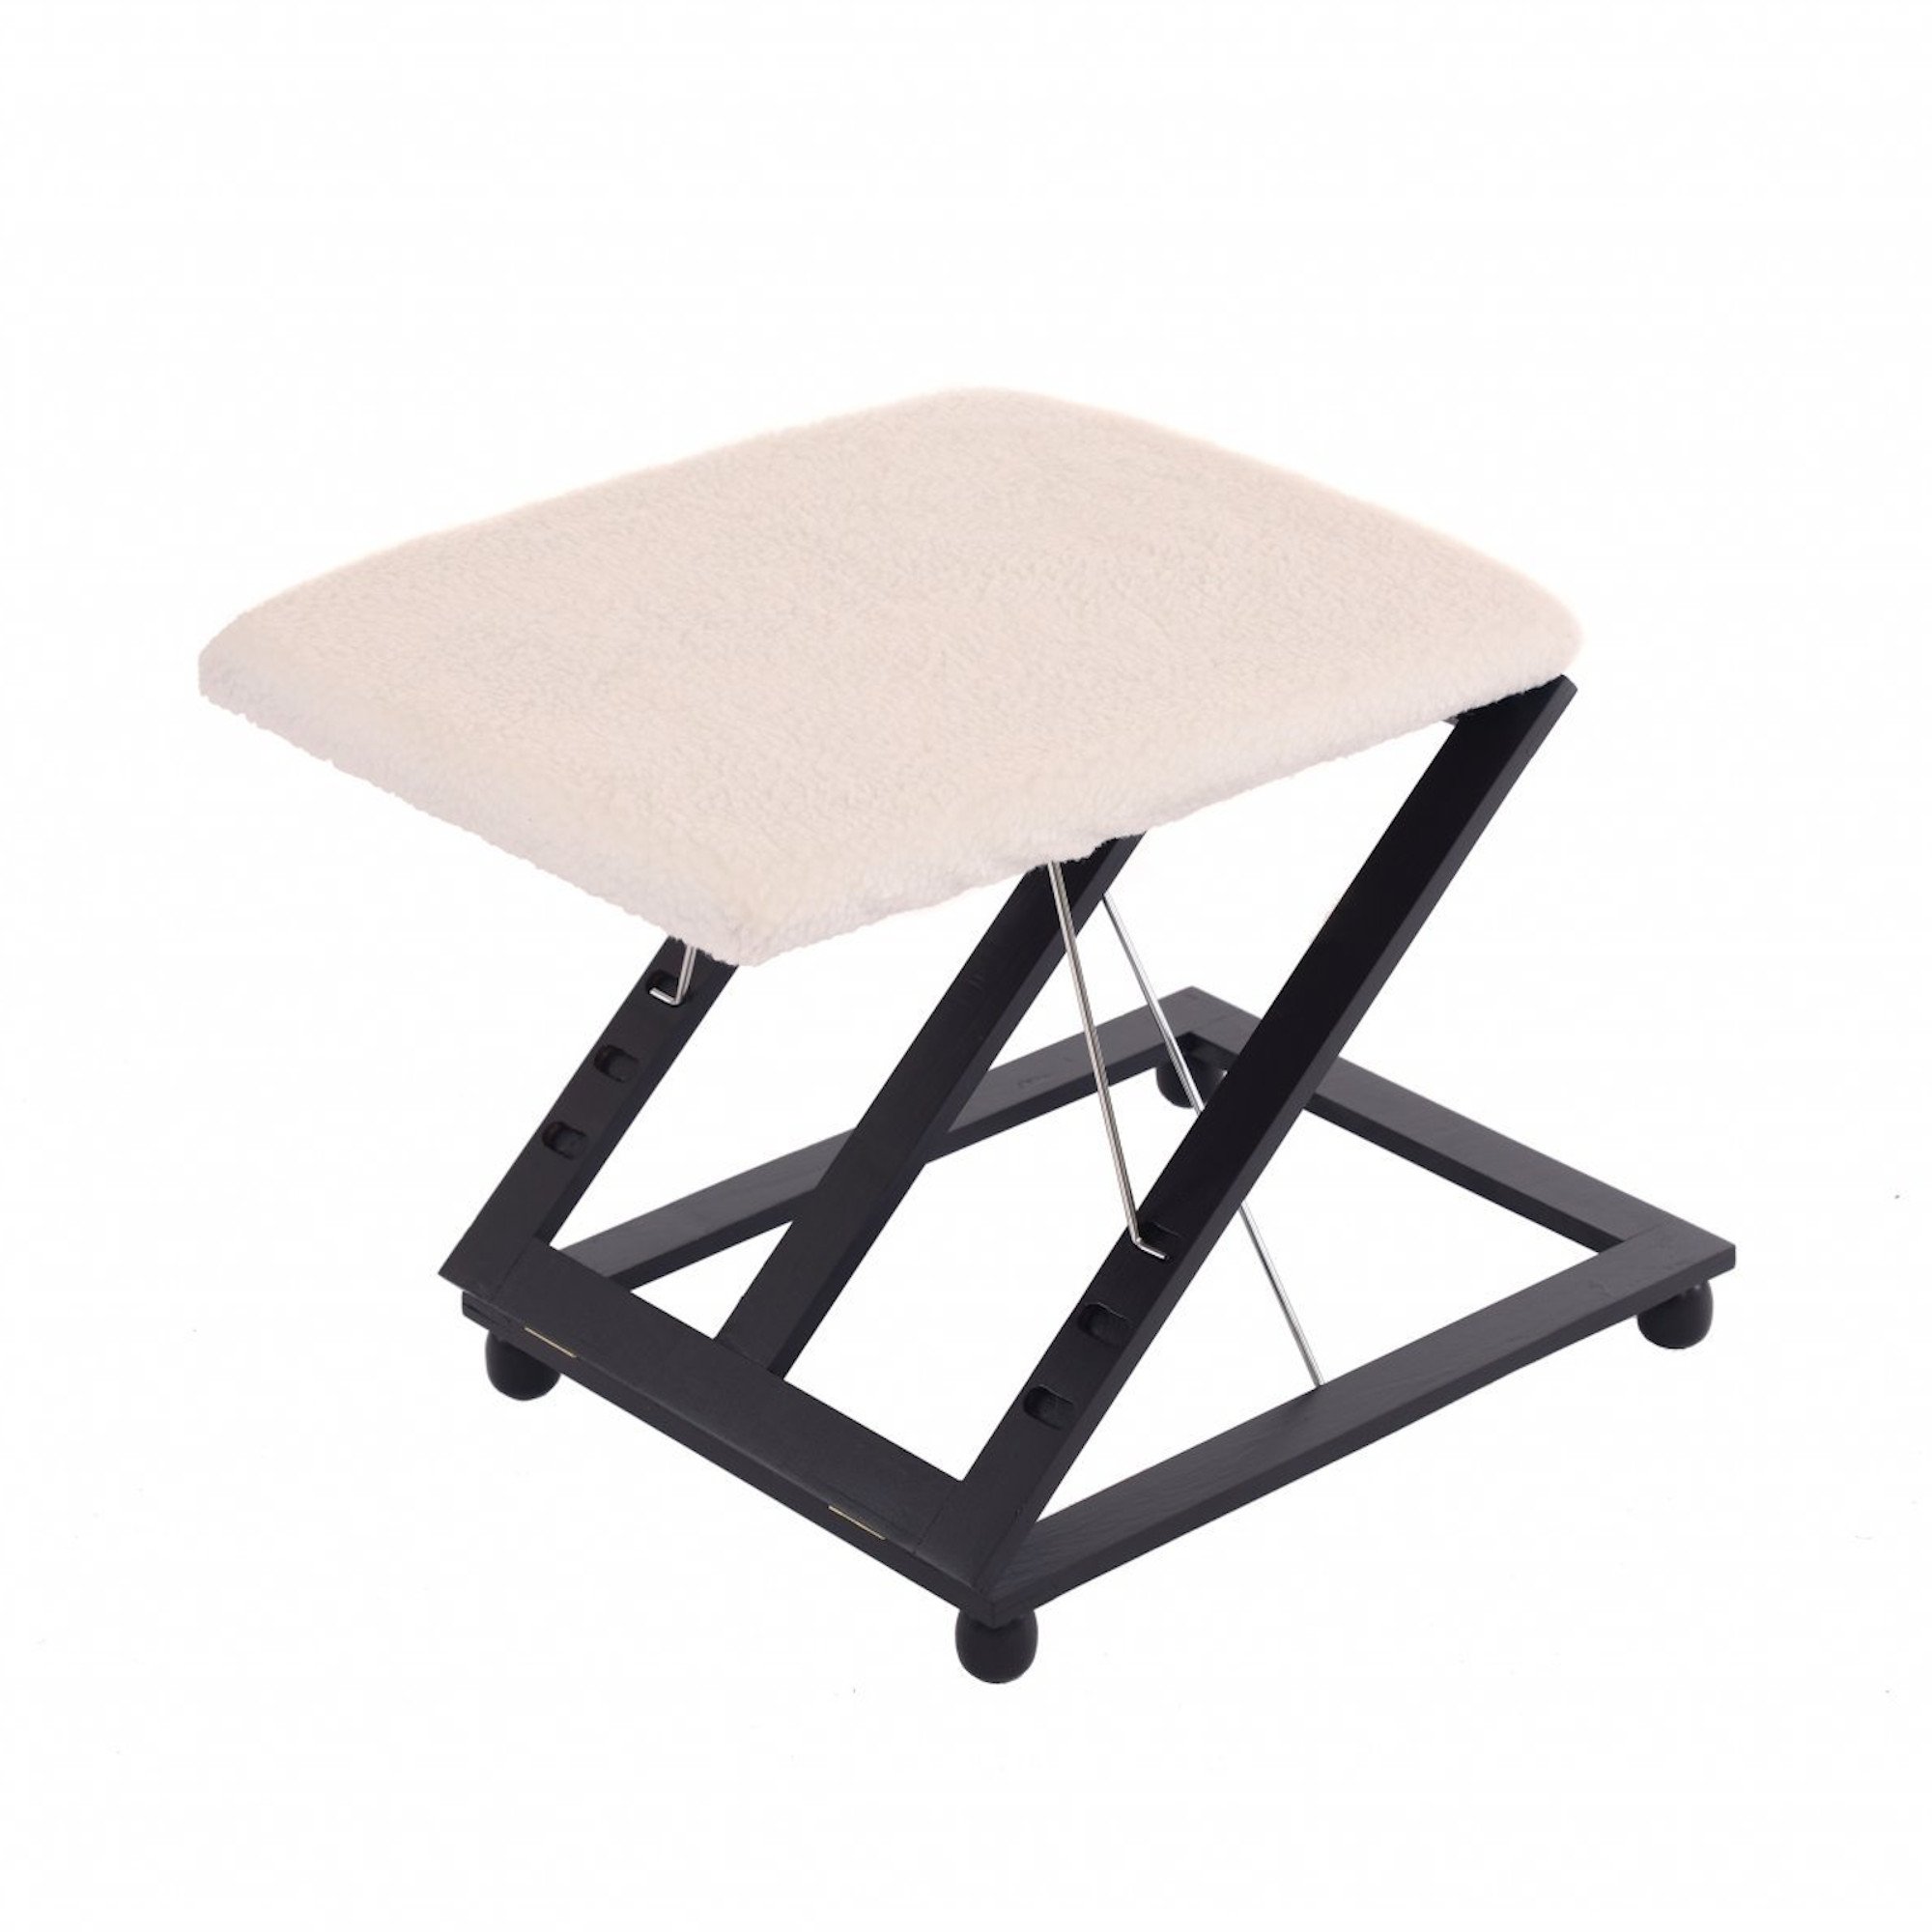 https://oypla.com/images/products/3994-adjustable-folding-cushion-padded-footstool-foot-rest.jpg